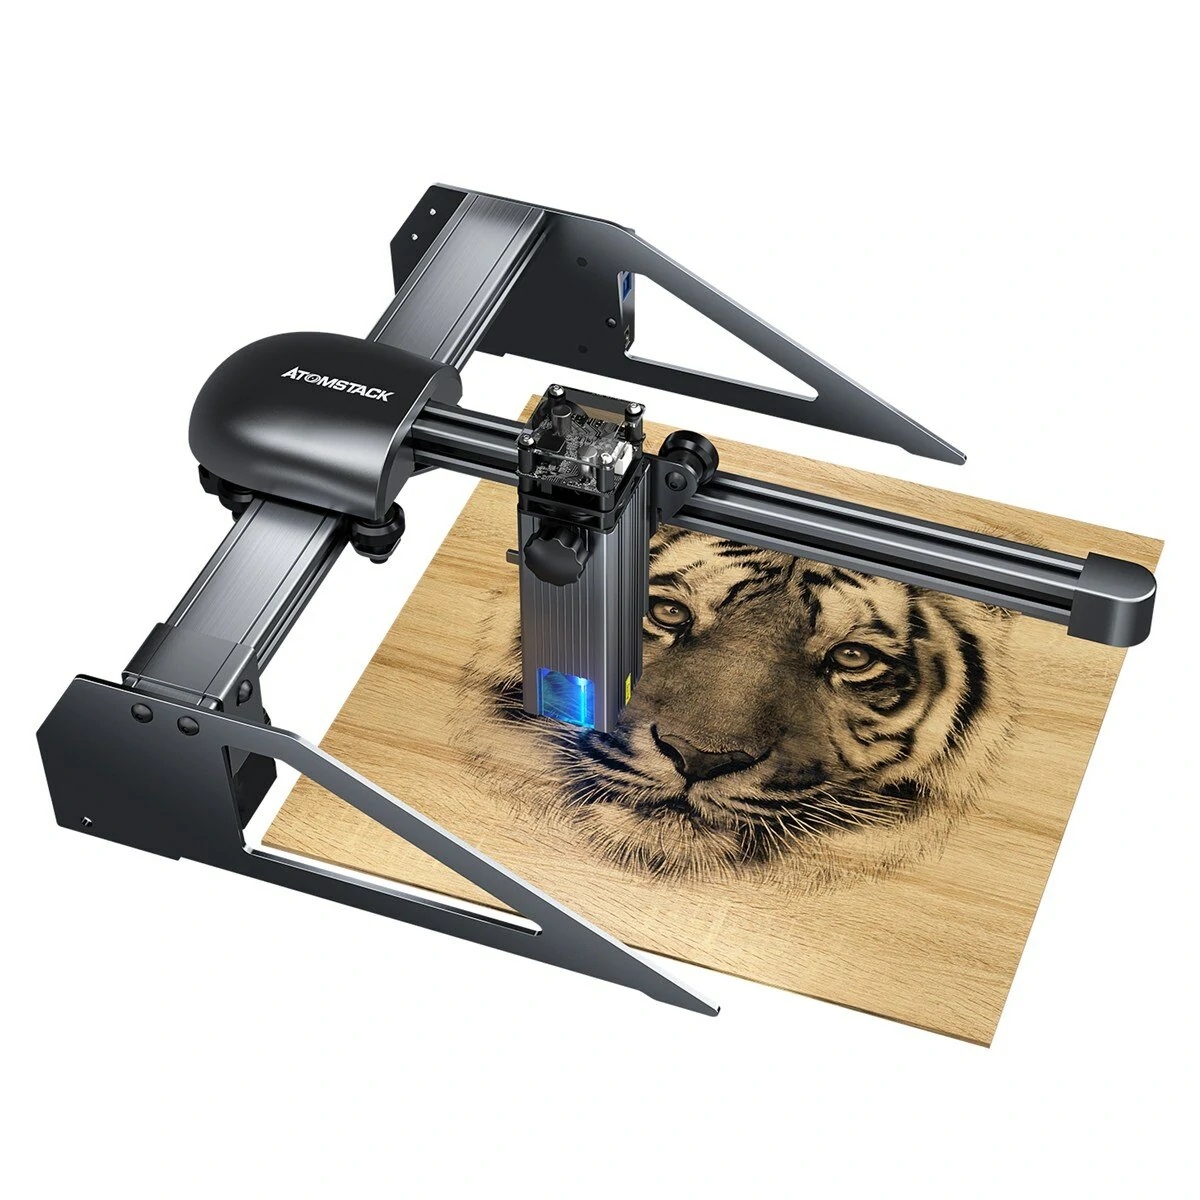 Find [EU DIRECT] New ATOMSTACK P7 M40 Portable Laser Engraving Machine Cutter Wood Cutting Design Desktop DIY Laser Engraver New Eye Protection Design Upgrated Ultra-Fine Laser Focal Area for Sale on Gipsybee.com with cryptocurrencies